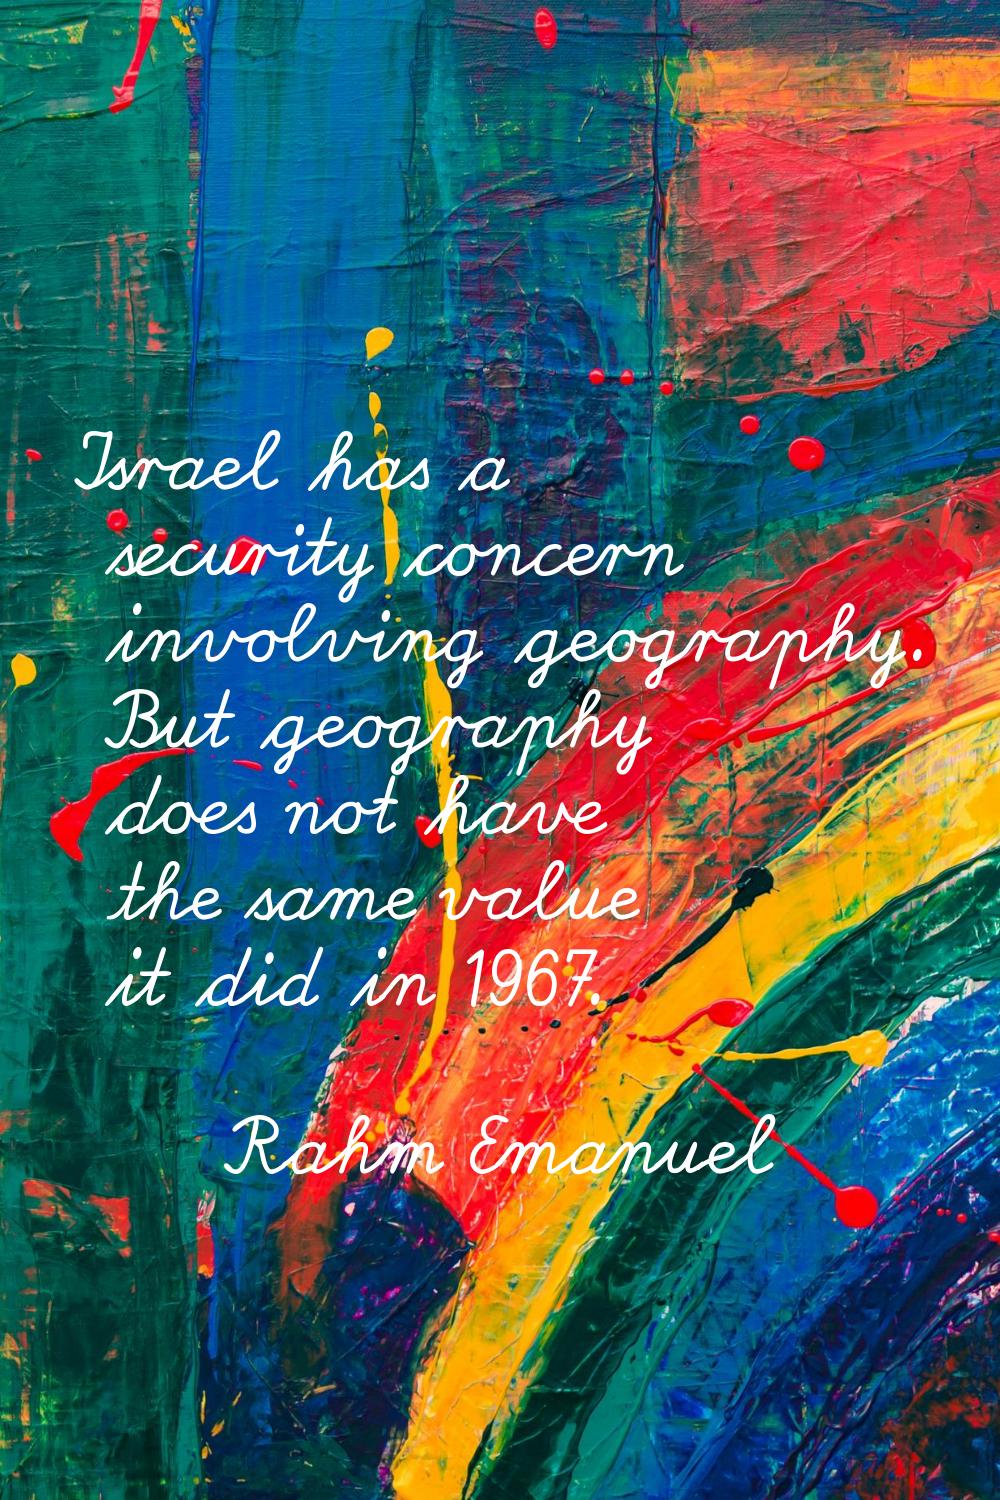 Israel has a security concern involving geography. But geography does not have the same value it di